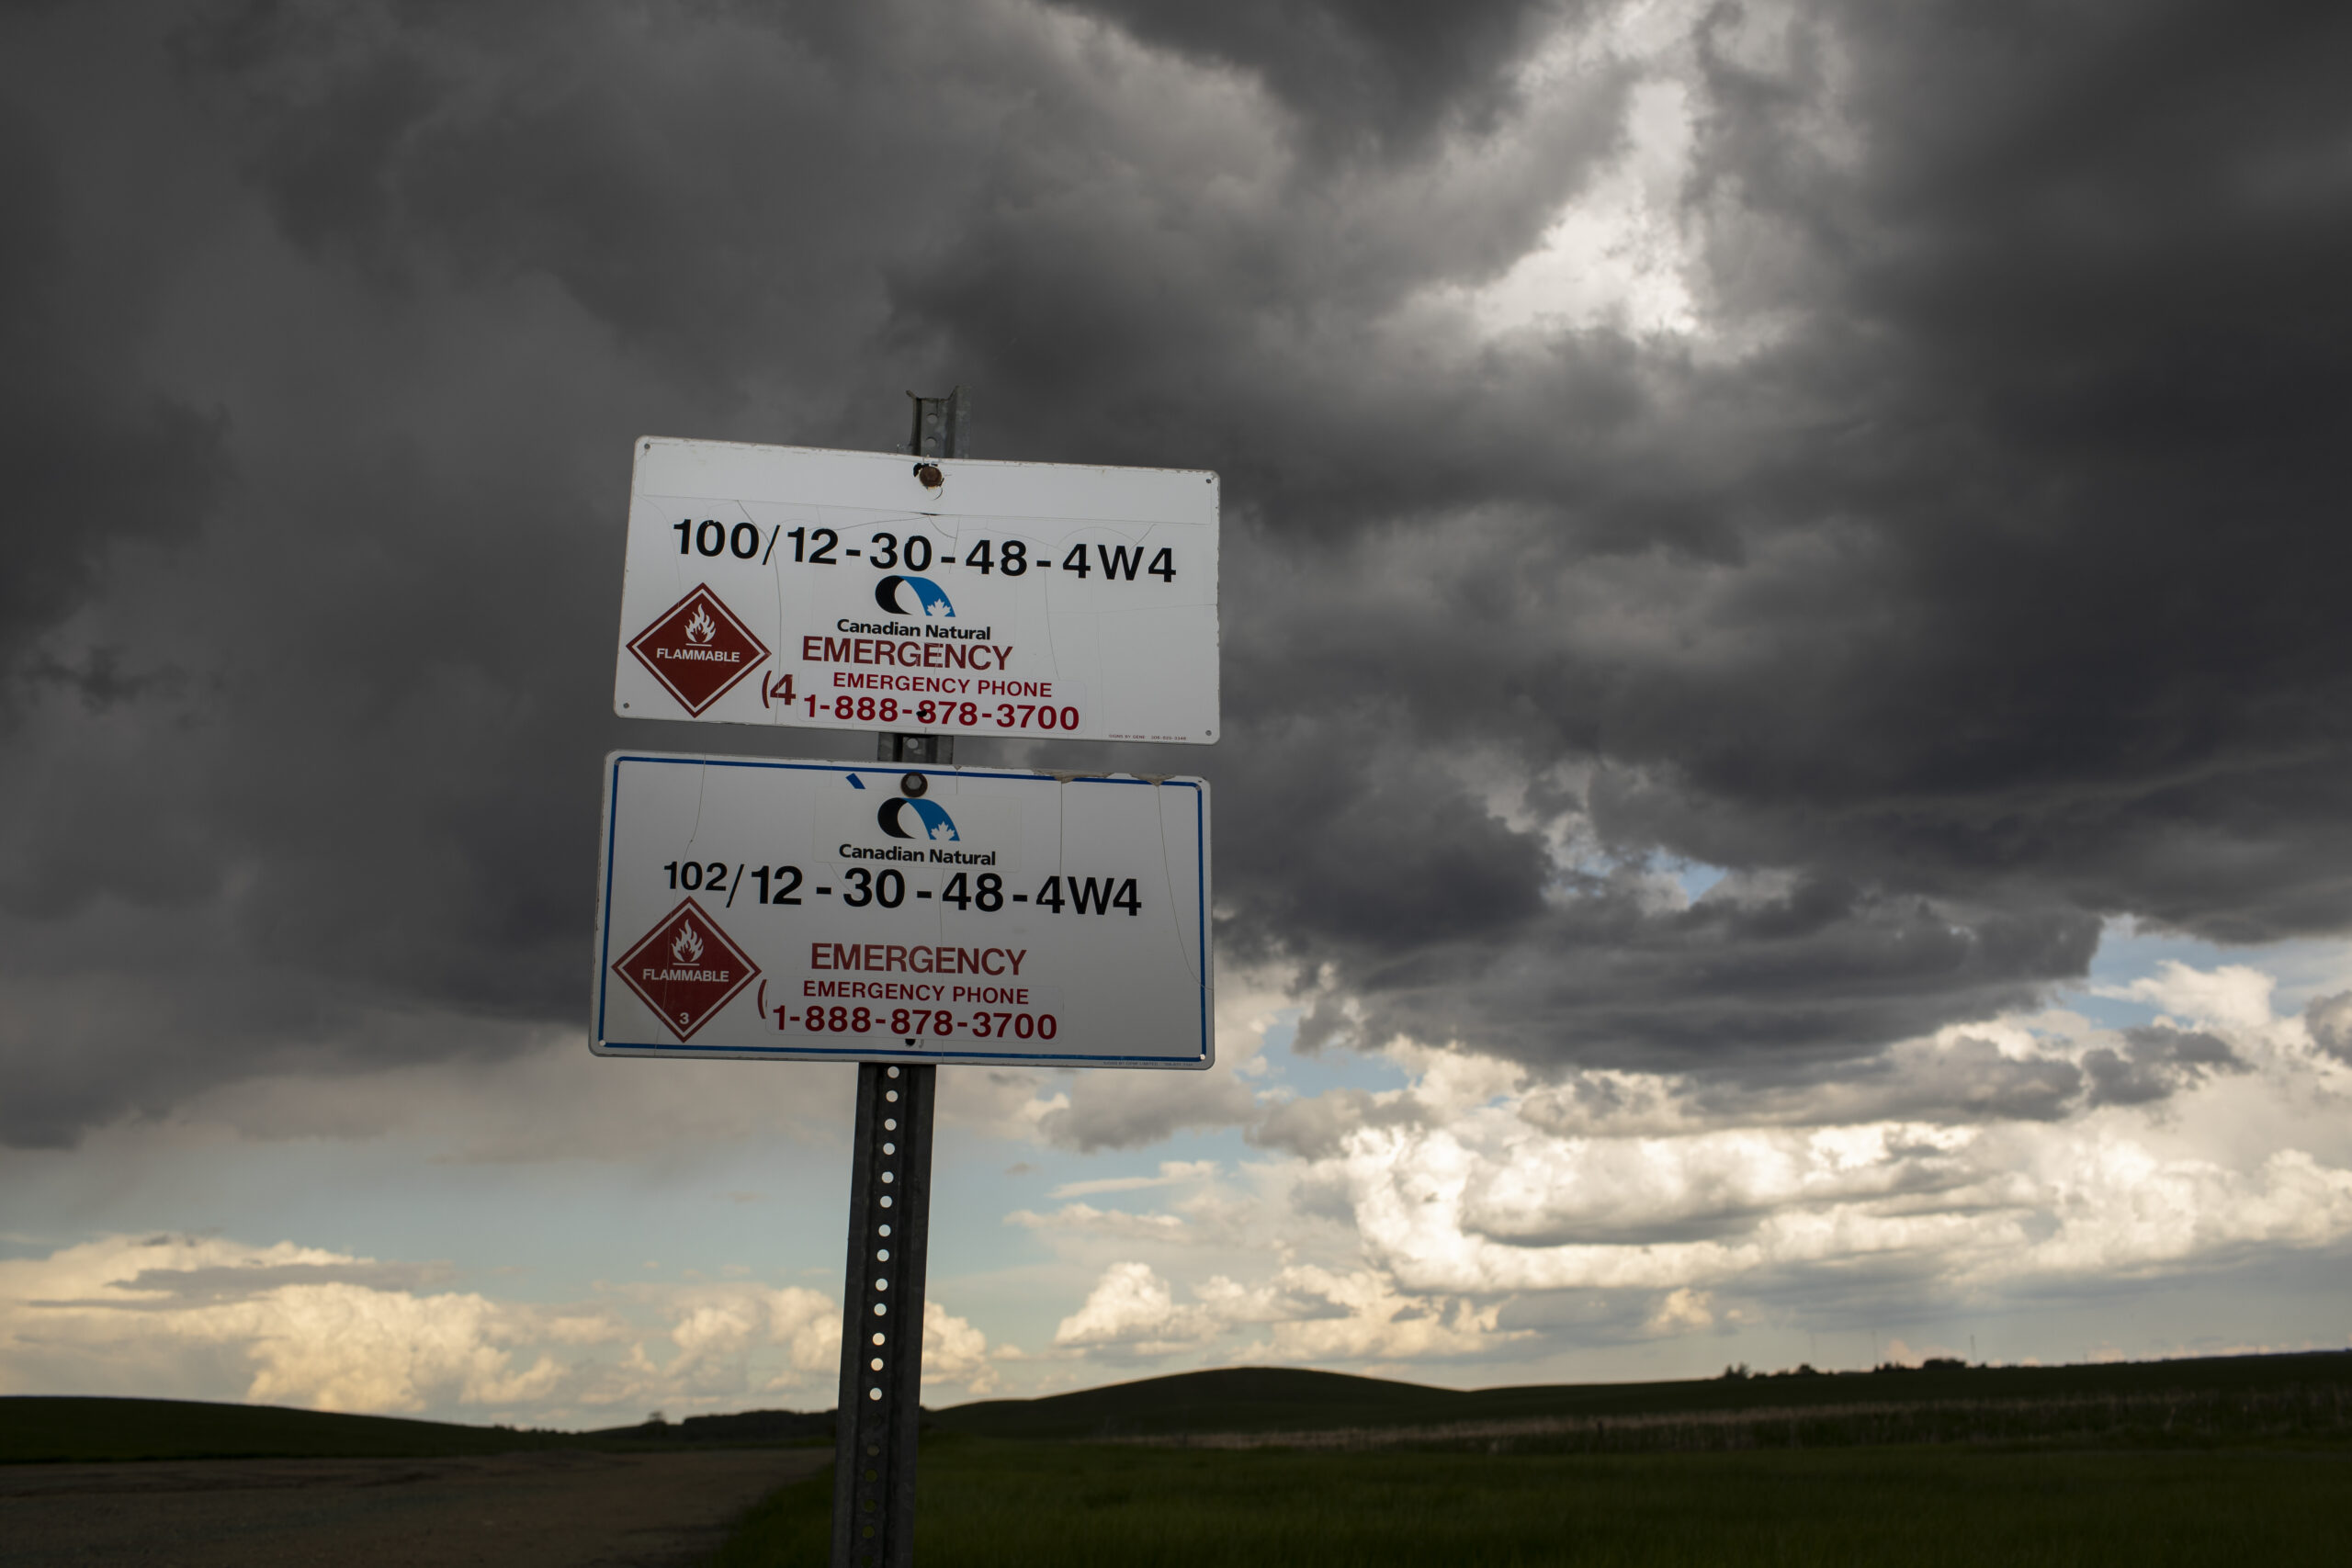 A CNRL sign shows a code corresponding to a well site in Alberta near Lloydminster on June 12, 2022.